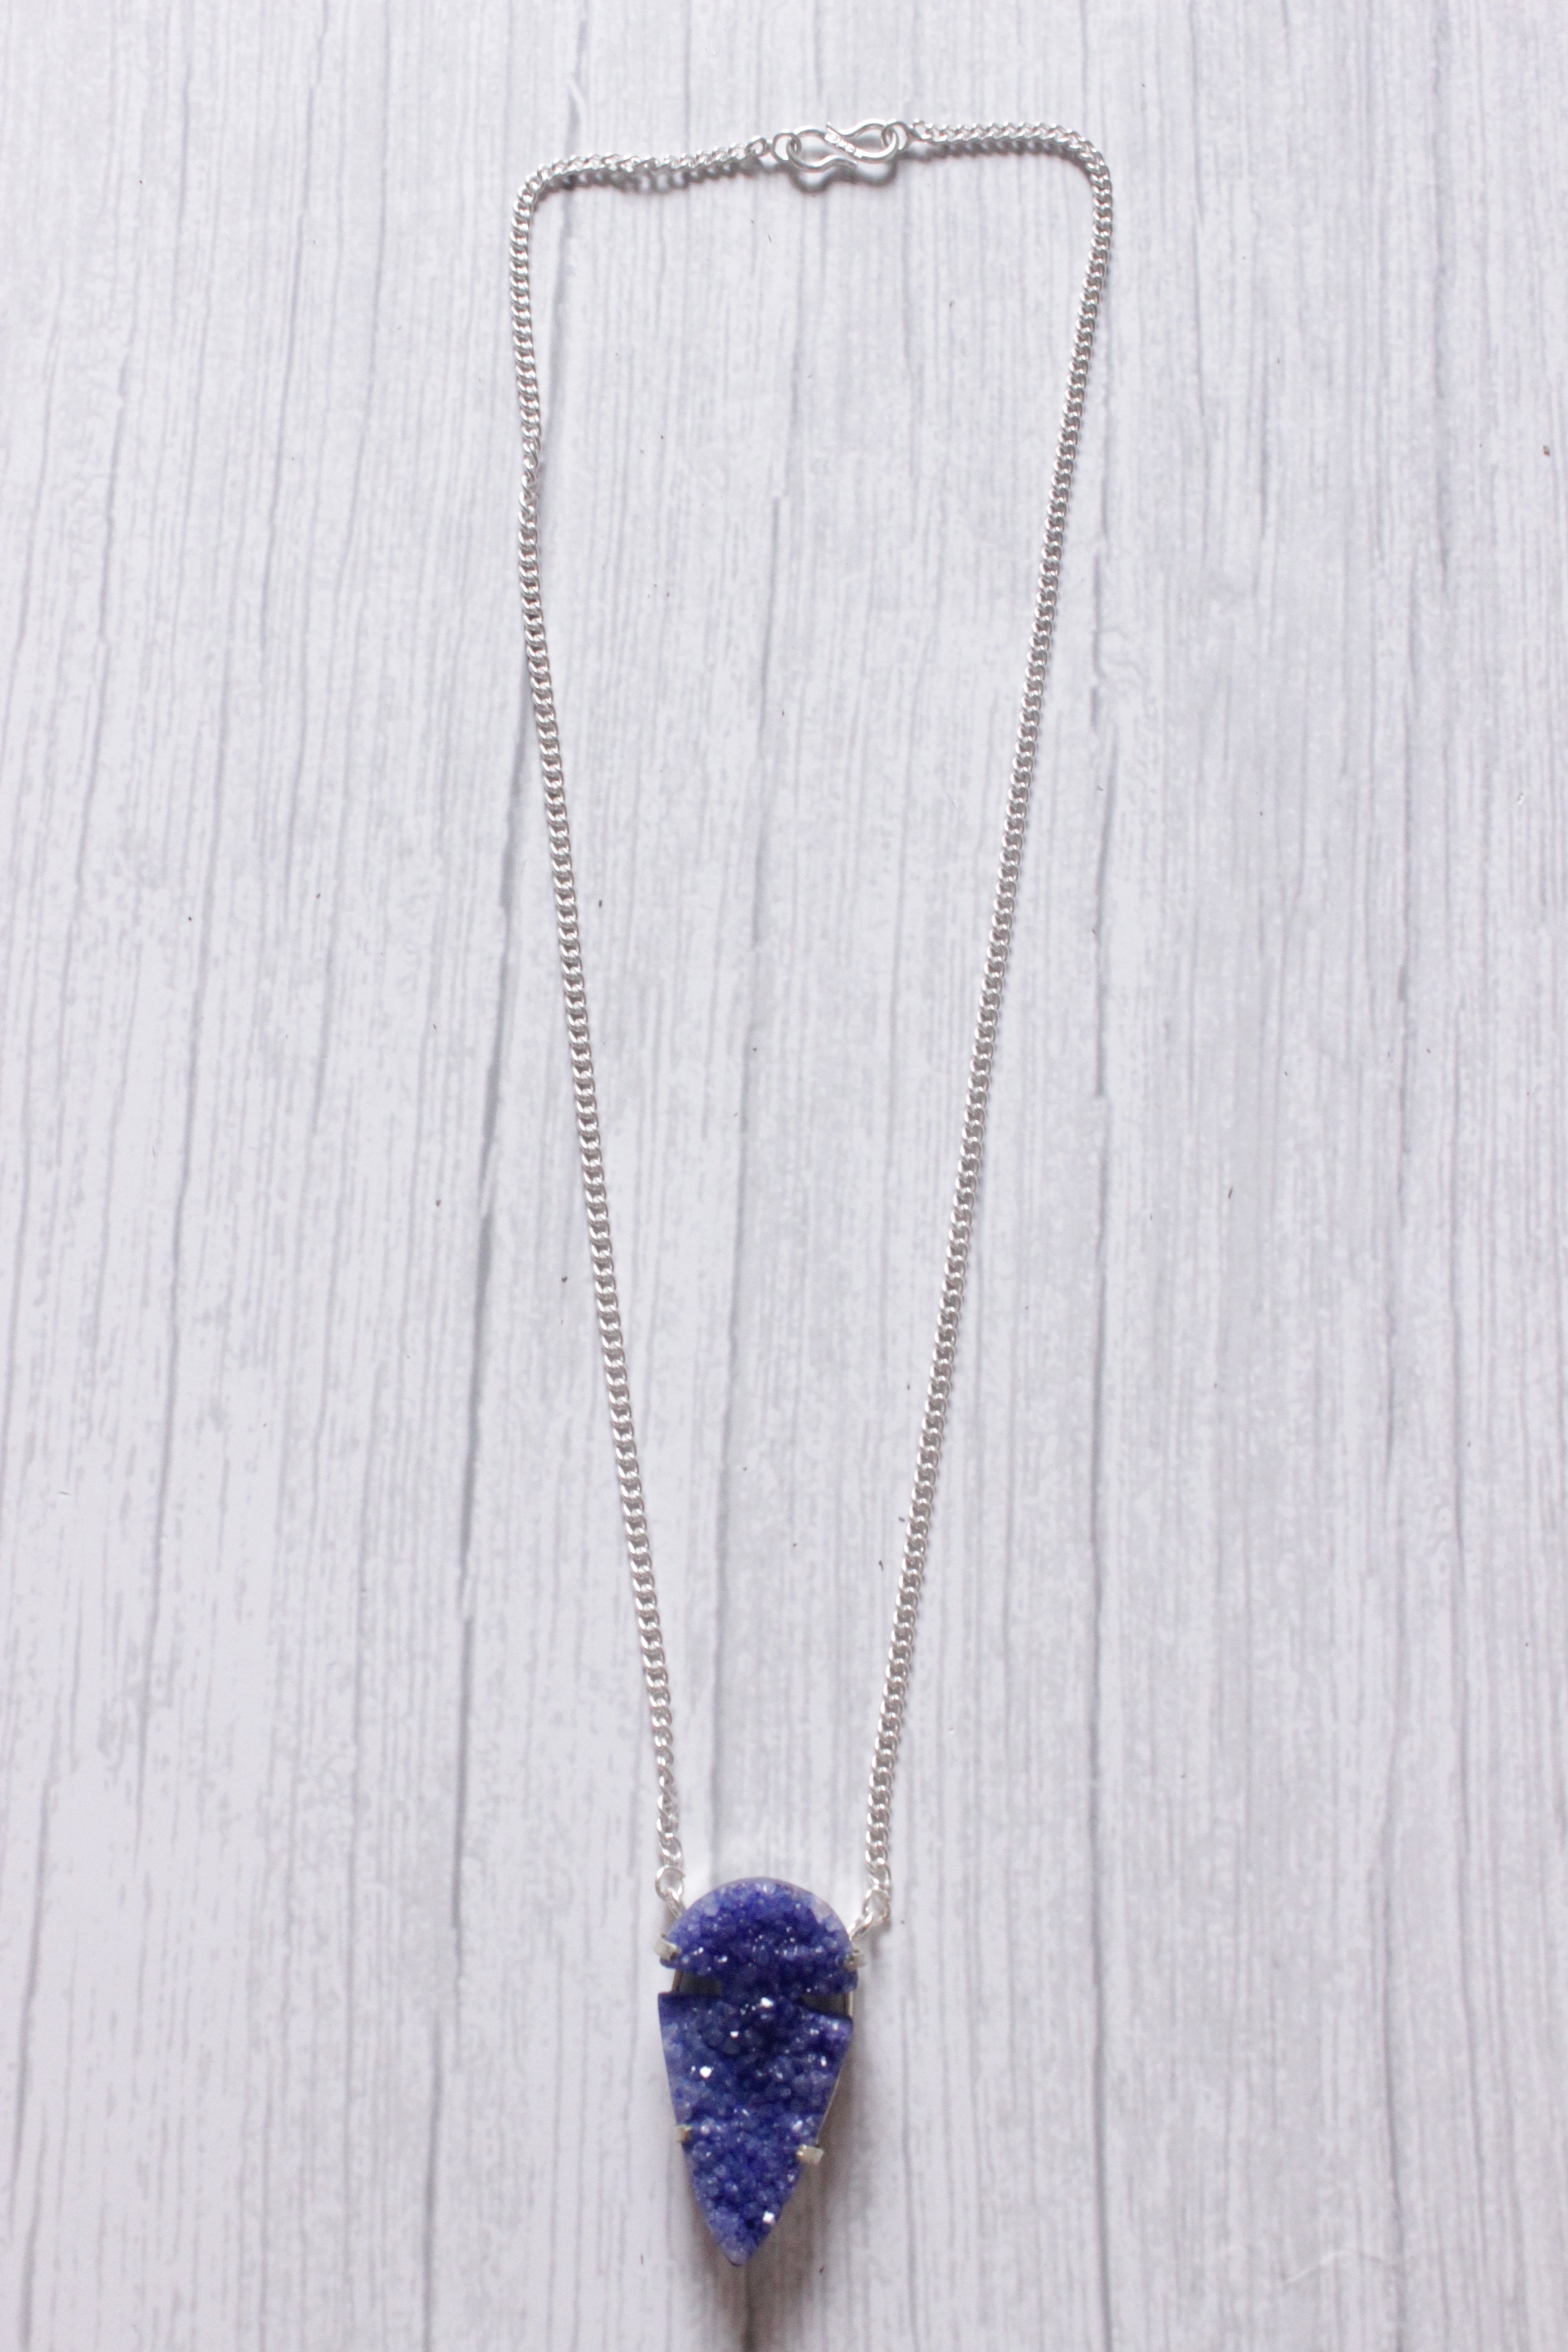 Blue Crystal Druzy Natural Gemstone Embedded Silver Plated Necklace